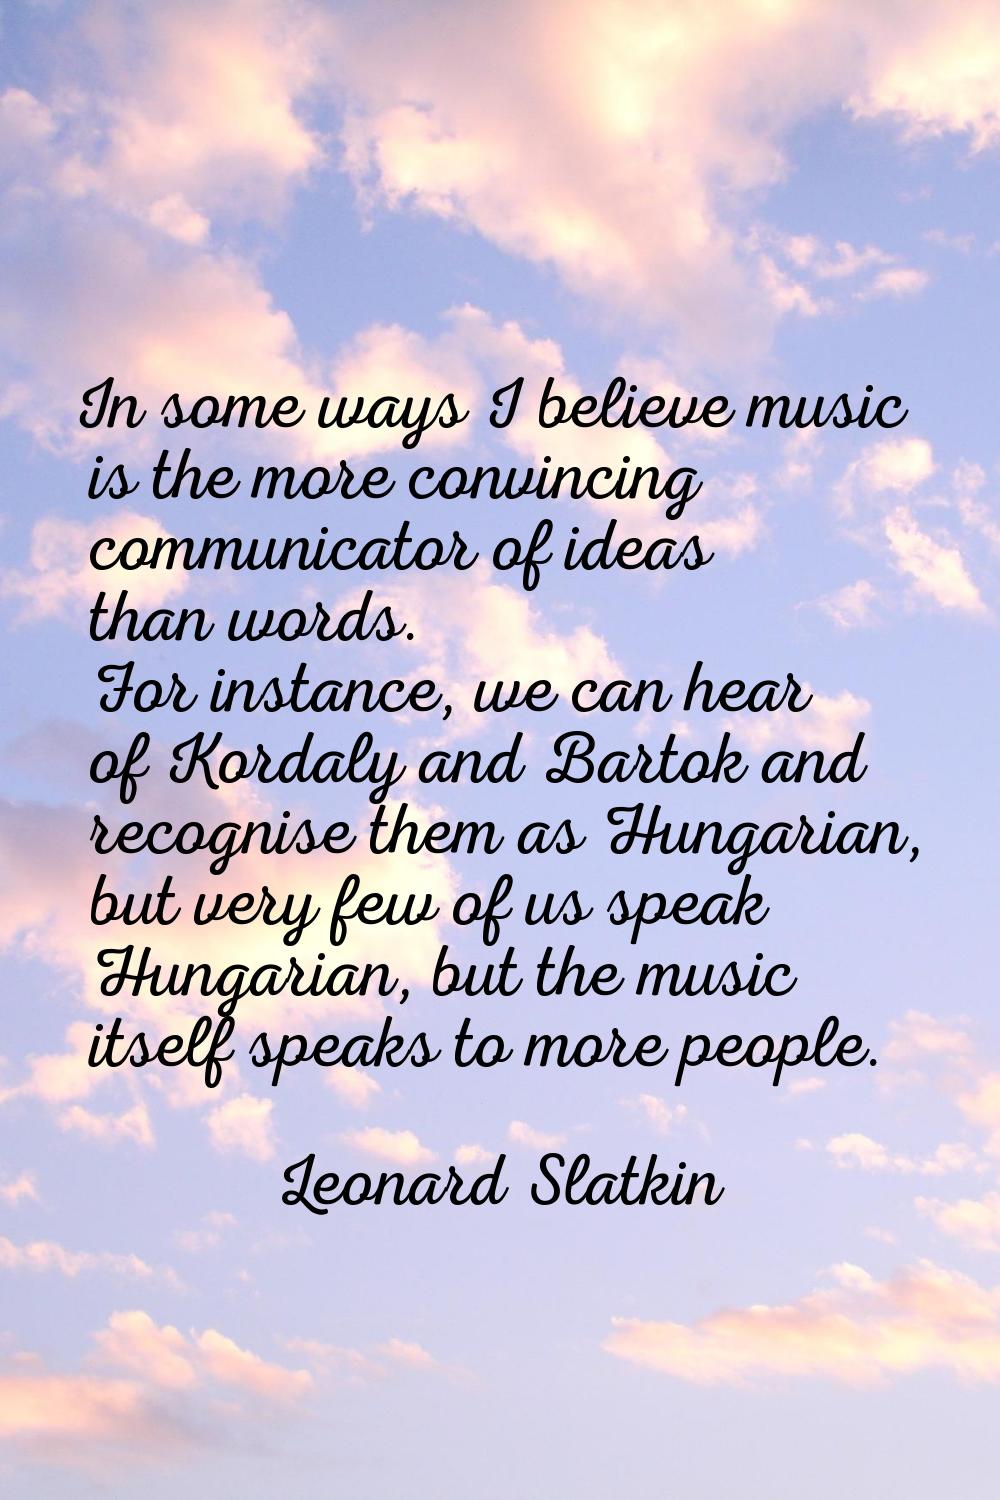 In some ways I believe music is the more convincing communicator of ideas than words. For instance,